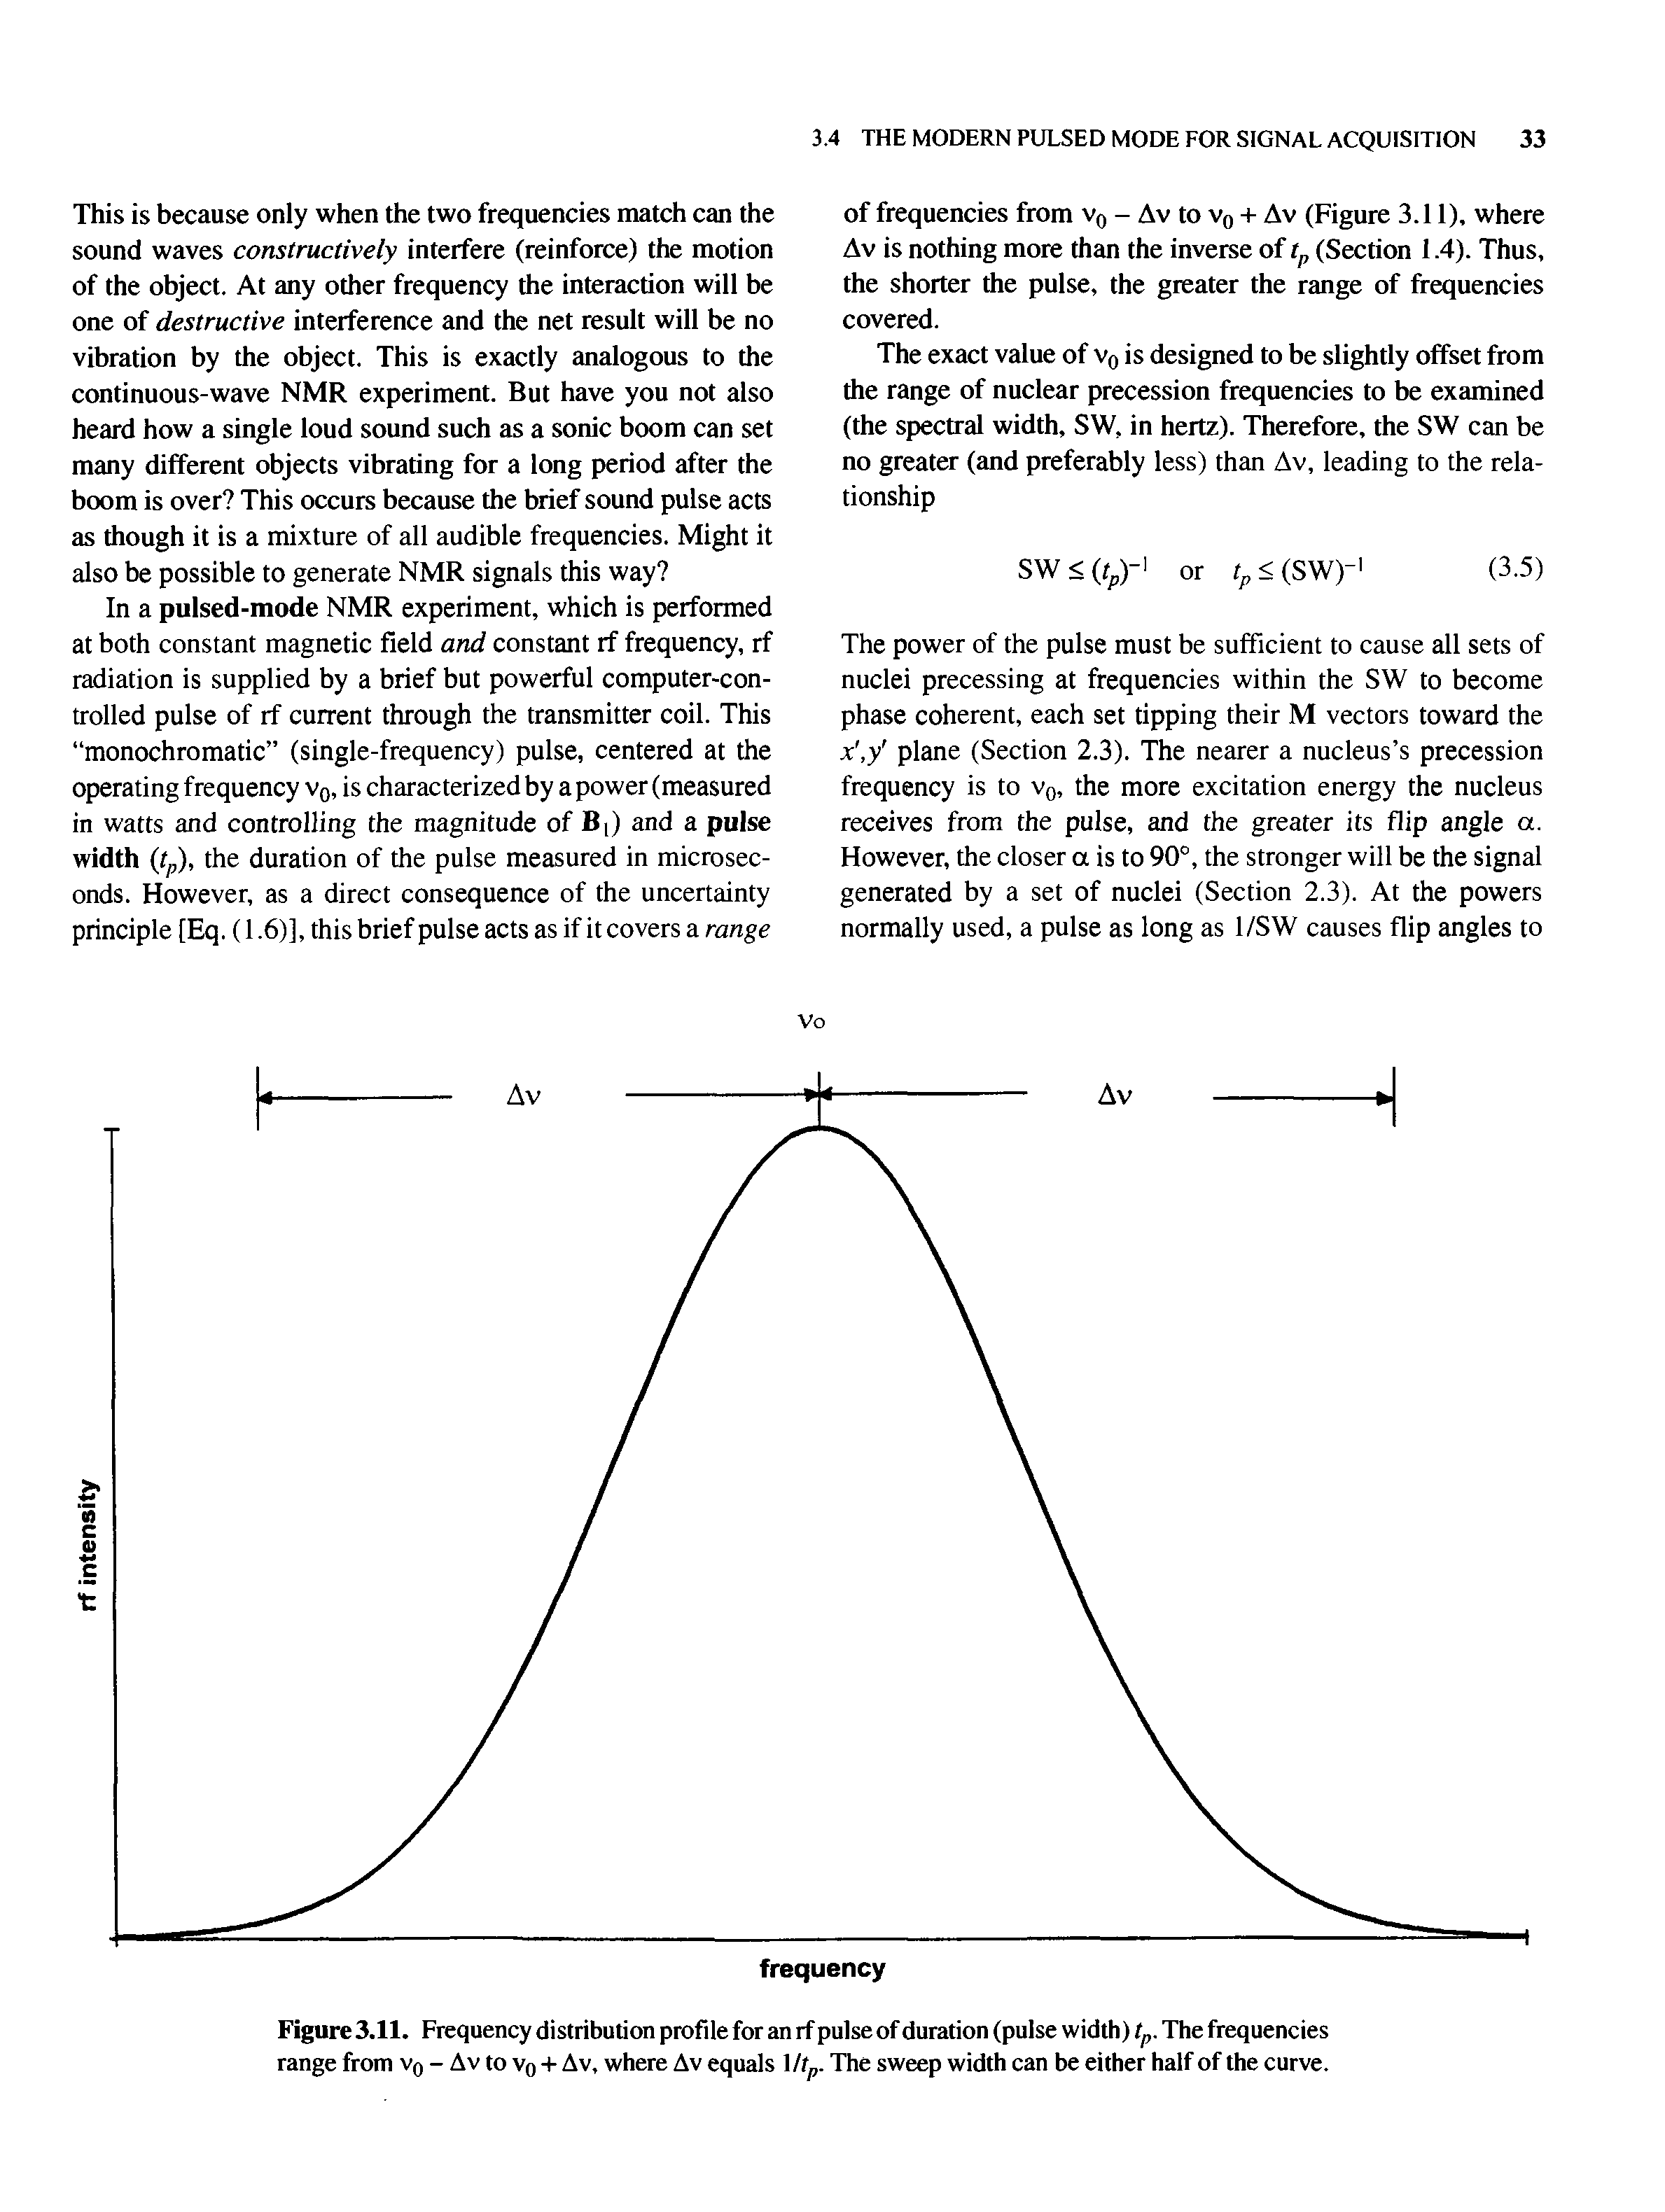 Figure 3.11. Frequency distribution profile for an rf pulse of duration (pulse width) tp. The frequencies range from v0 - Av to v0 + Av, where Av equals Mtp. The sweep width can be either half of the curve.